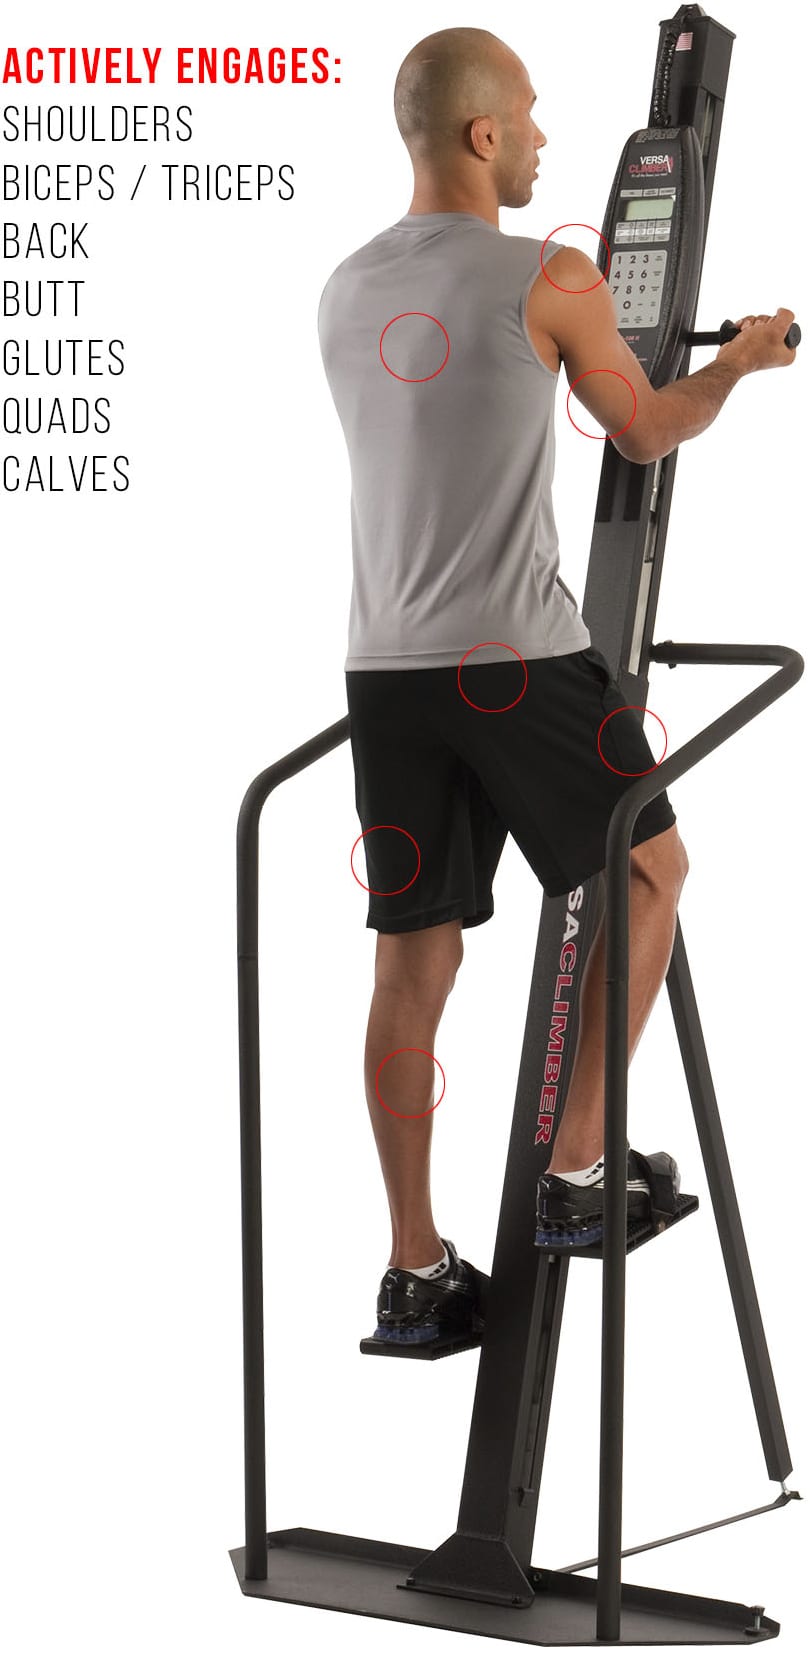 VersaClimber HP Actively Engages Muscle Groups